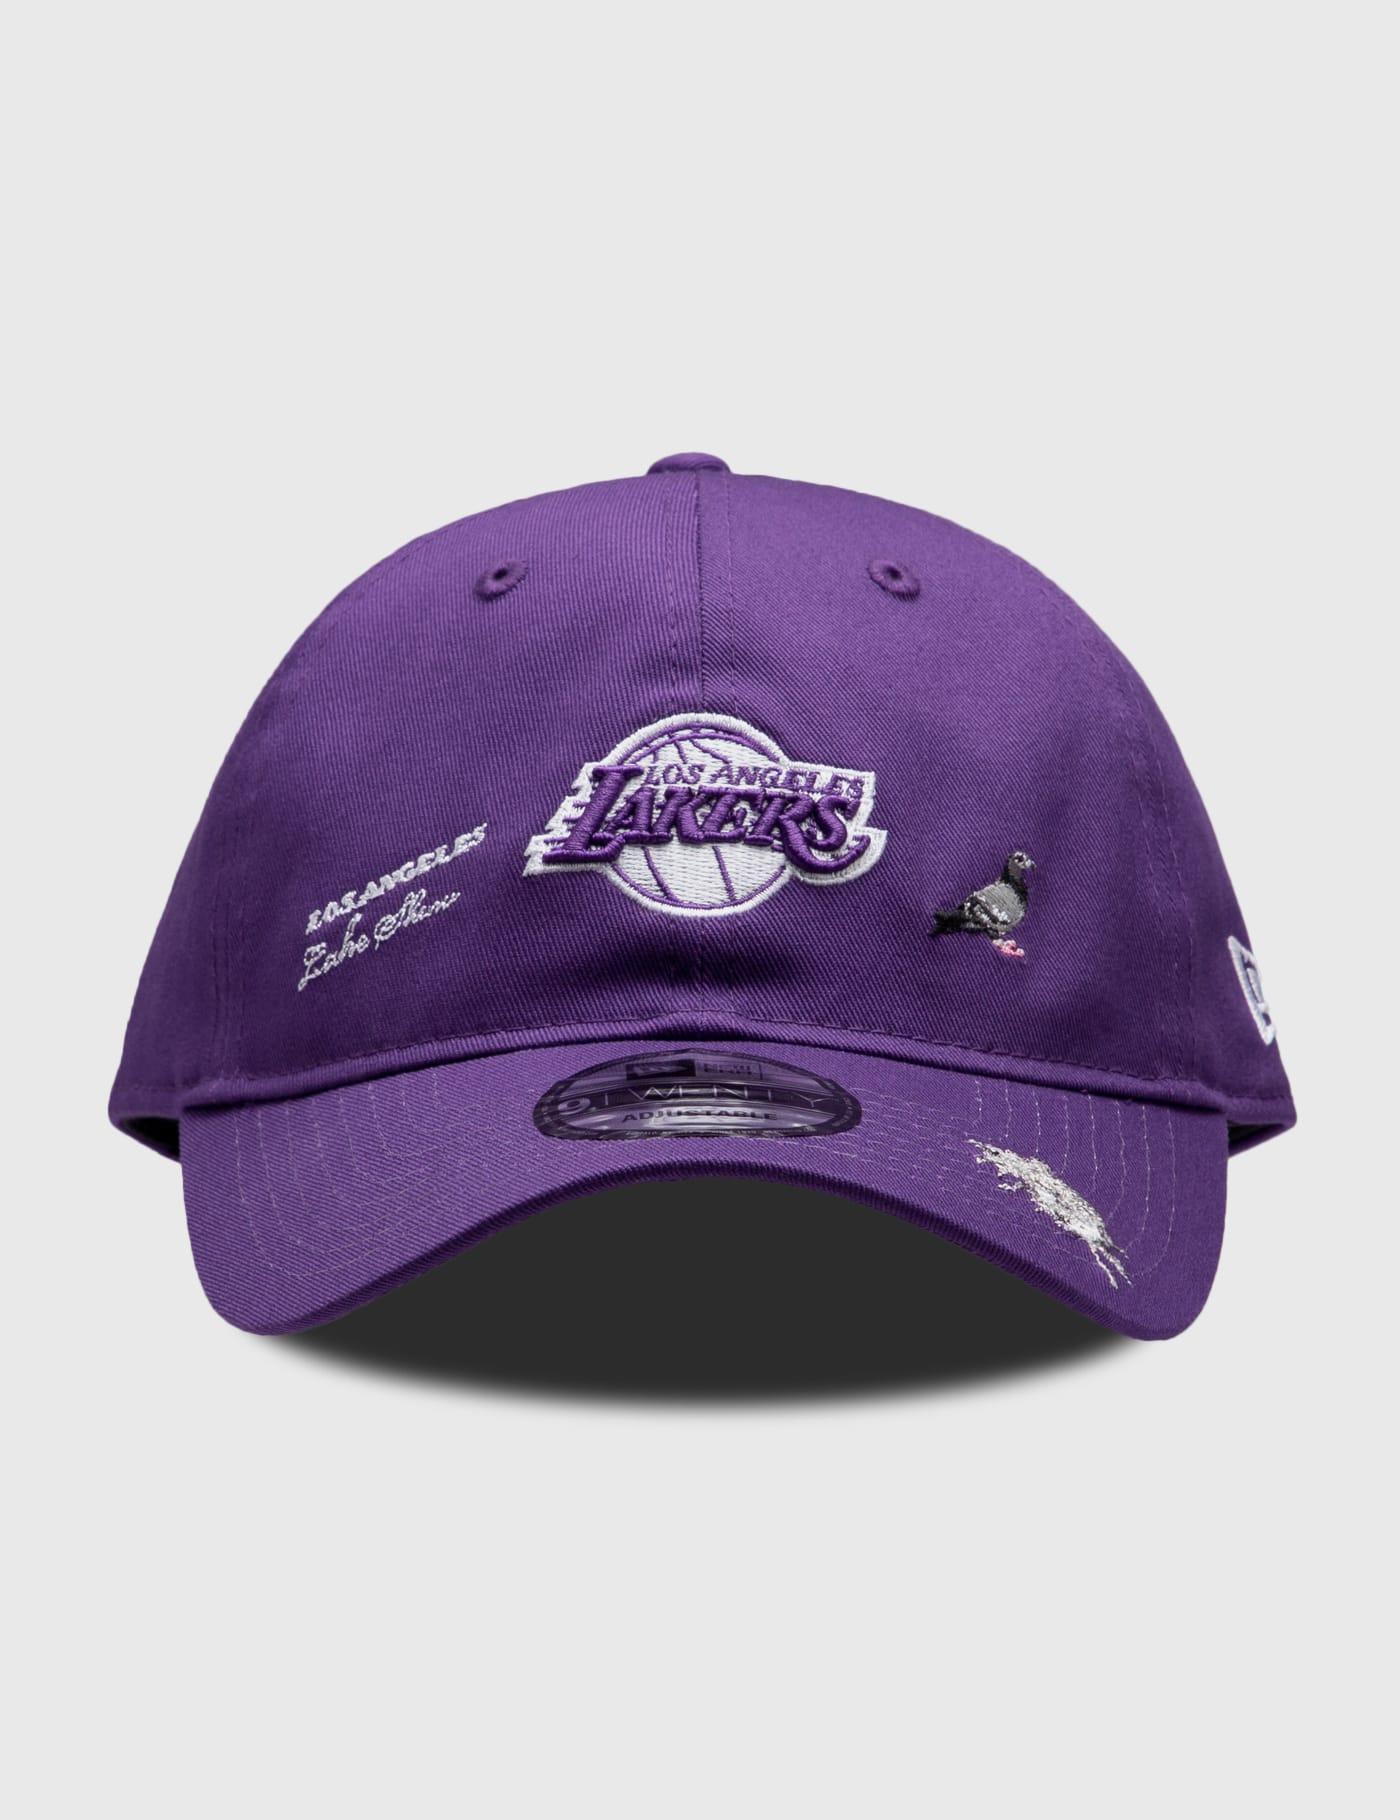 New Era - Staple x NBA Los Angeles Lakers 9TWENTY Cap | HBX - Globally  Curated Fashion and Lifestyle by Hypebeast